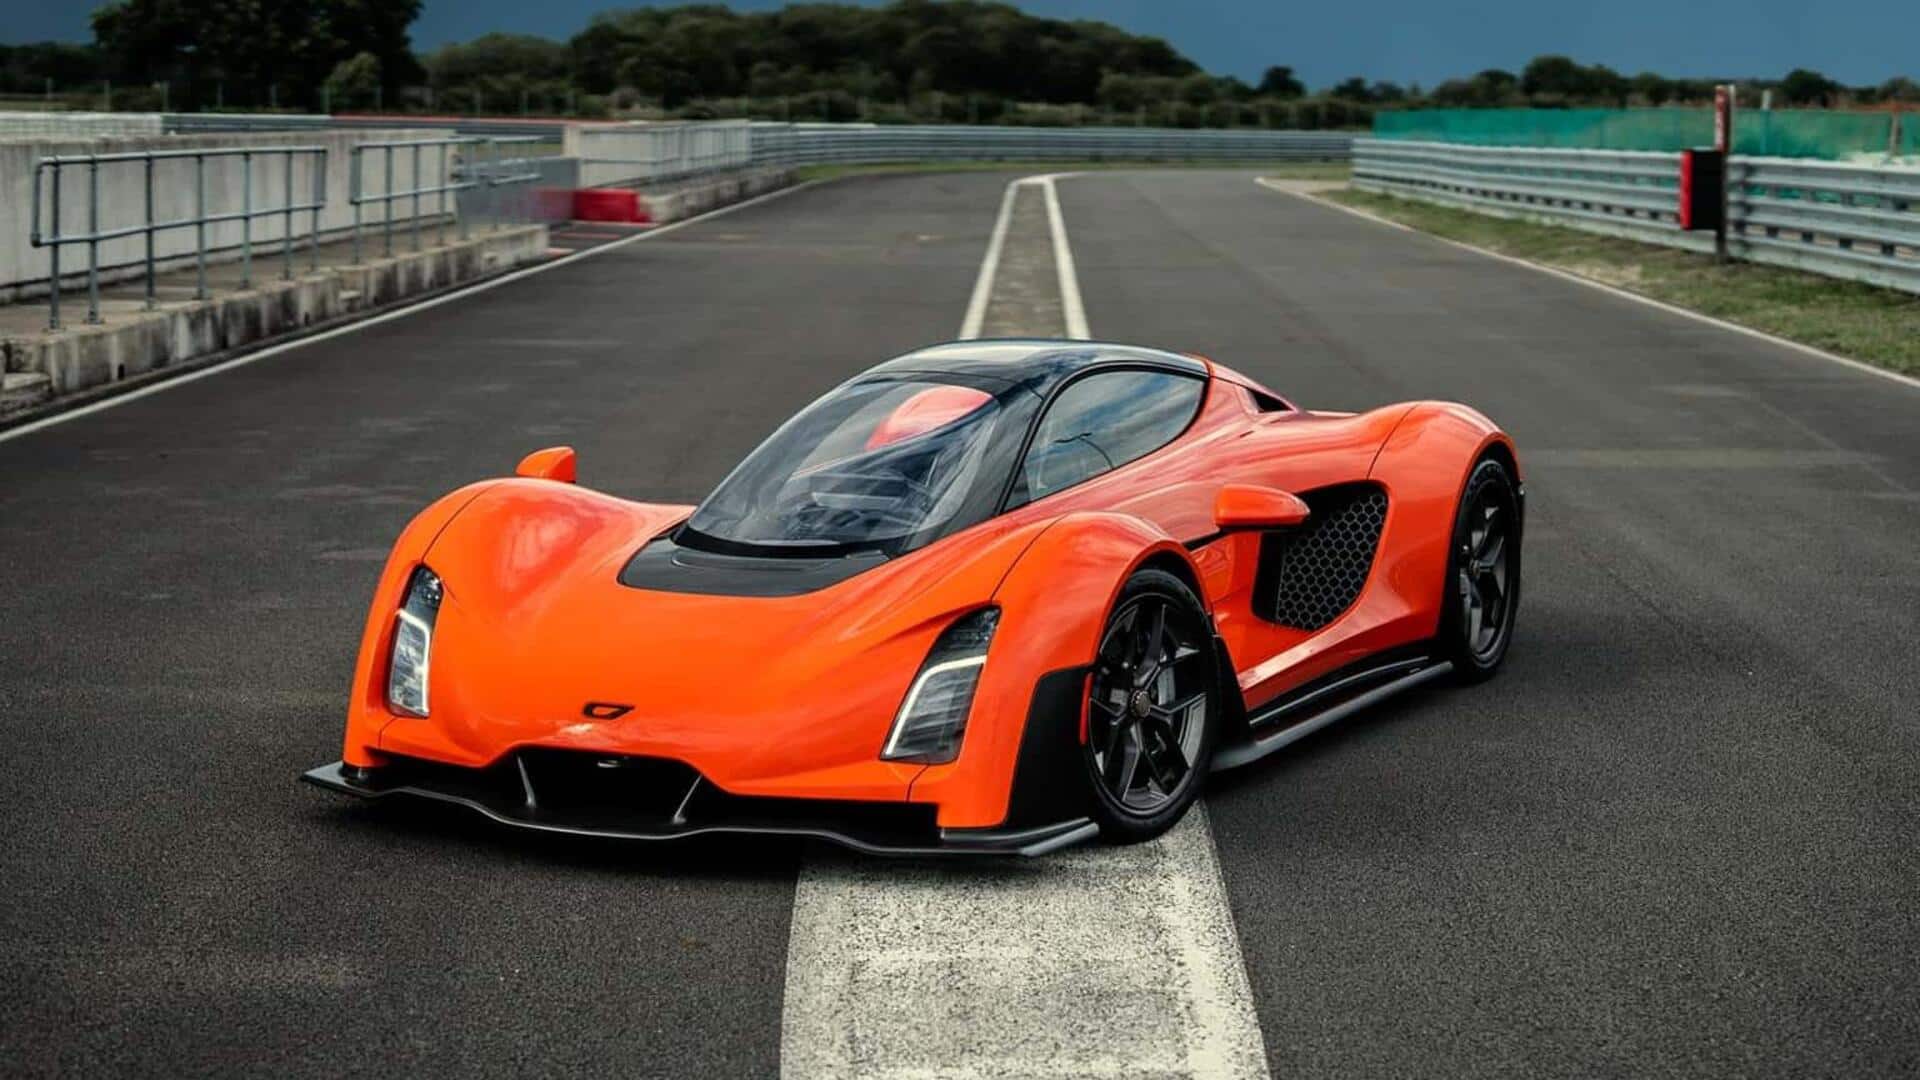 Top features of the Czinger 21C V Max hypercar